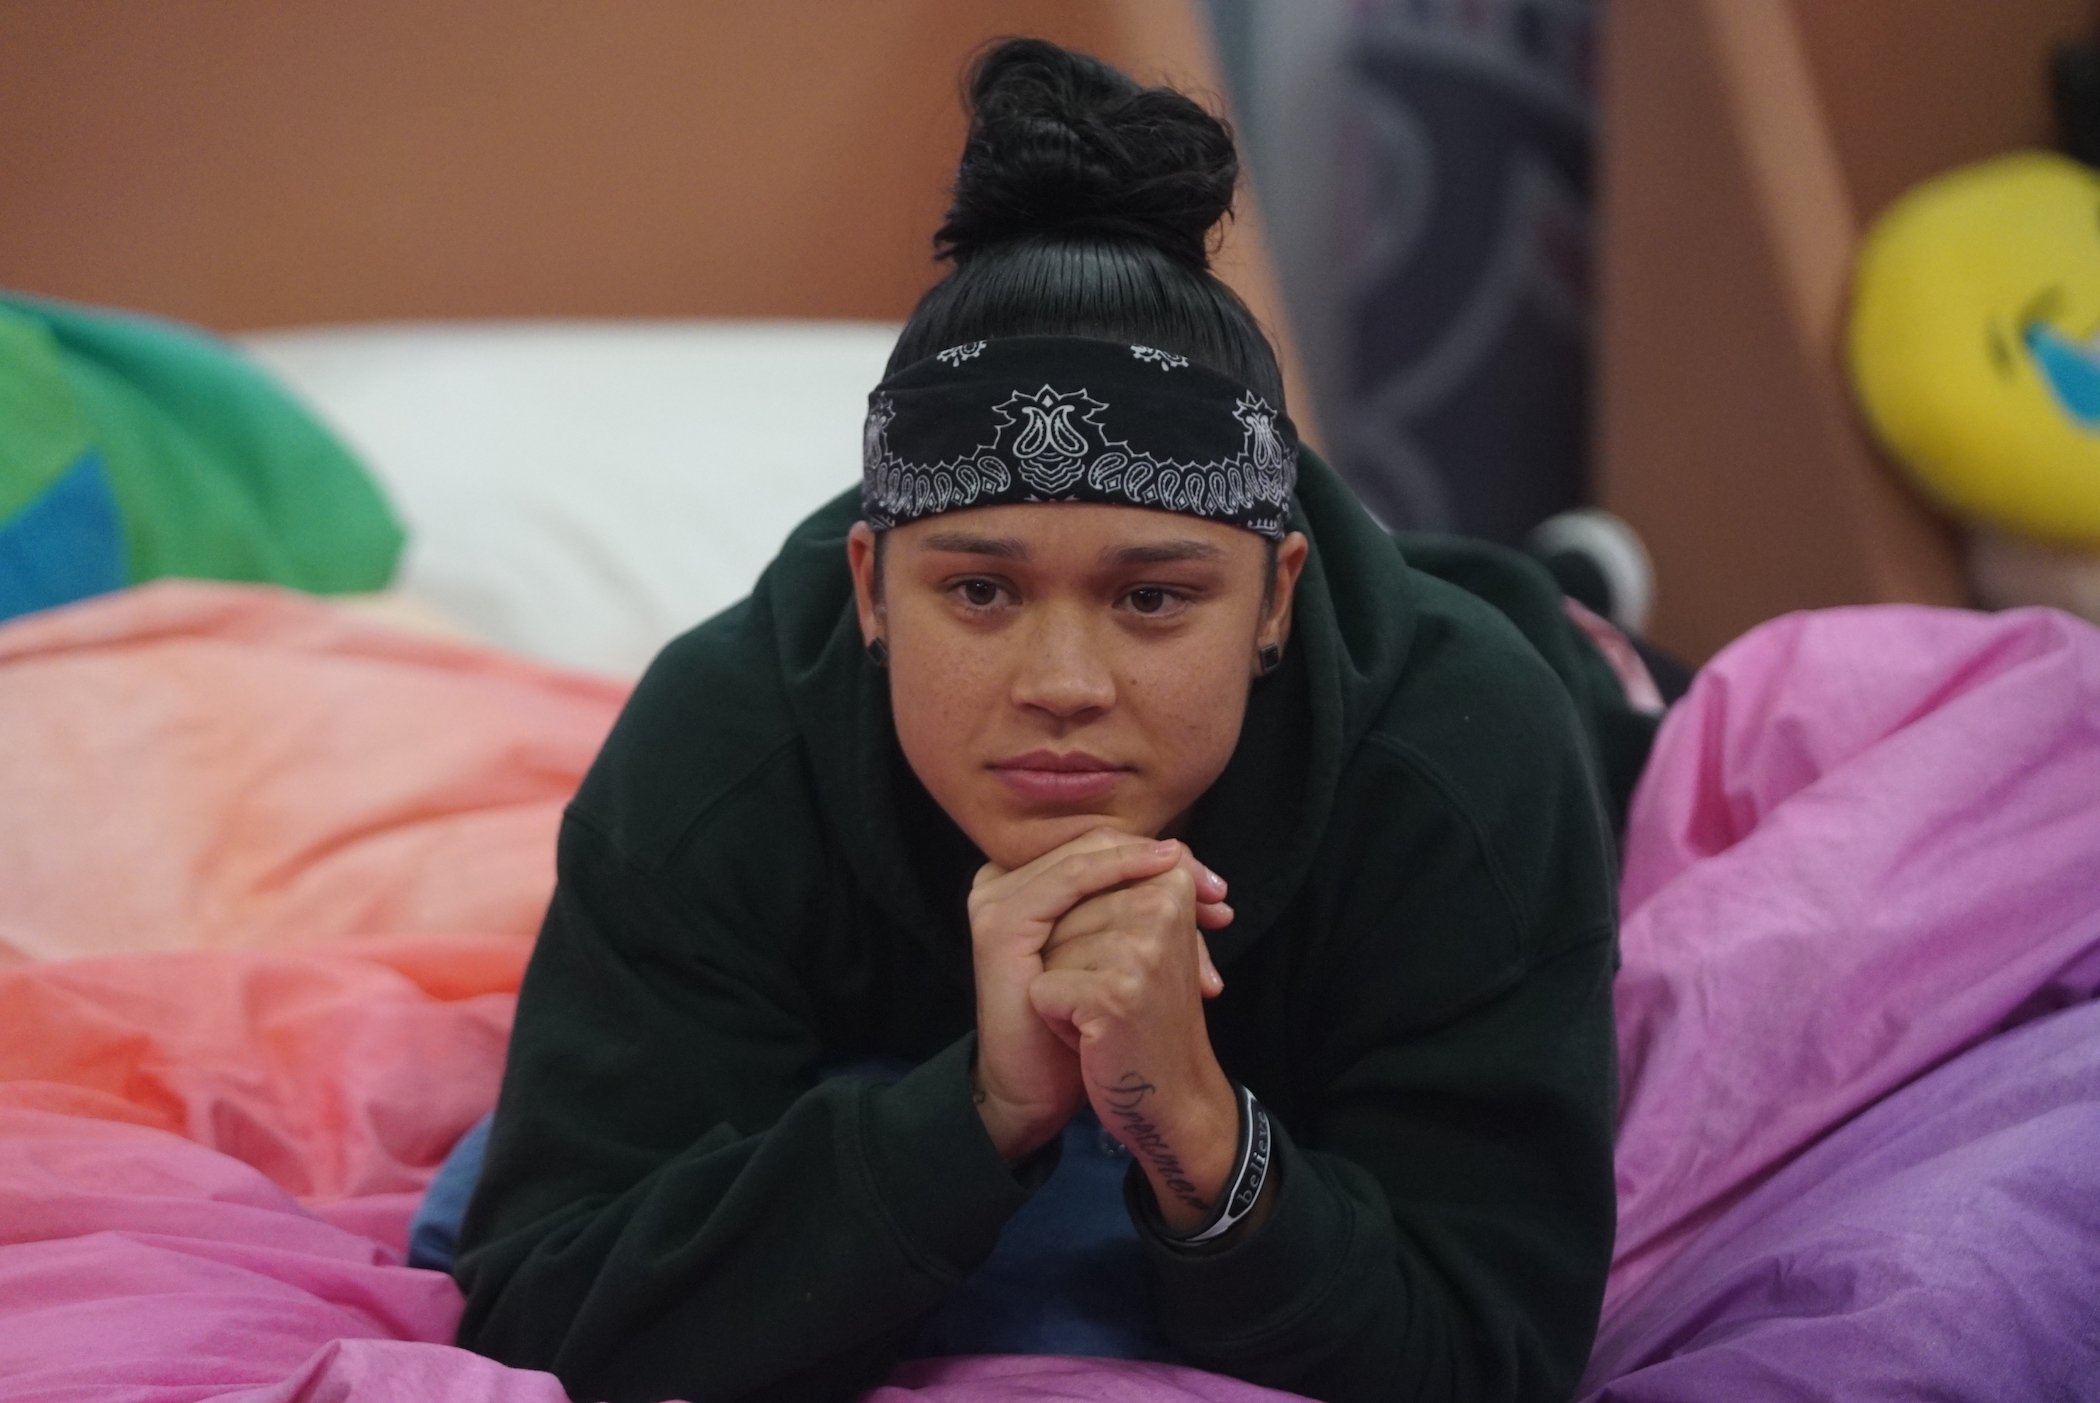 Kaycee Clark, 'The Challenge' Season 37 winner, in the 'Big Brother' house on a bed